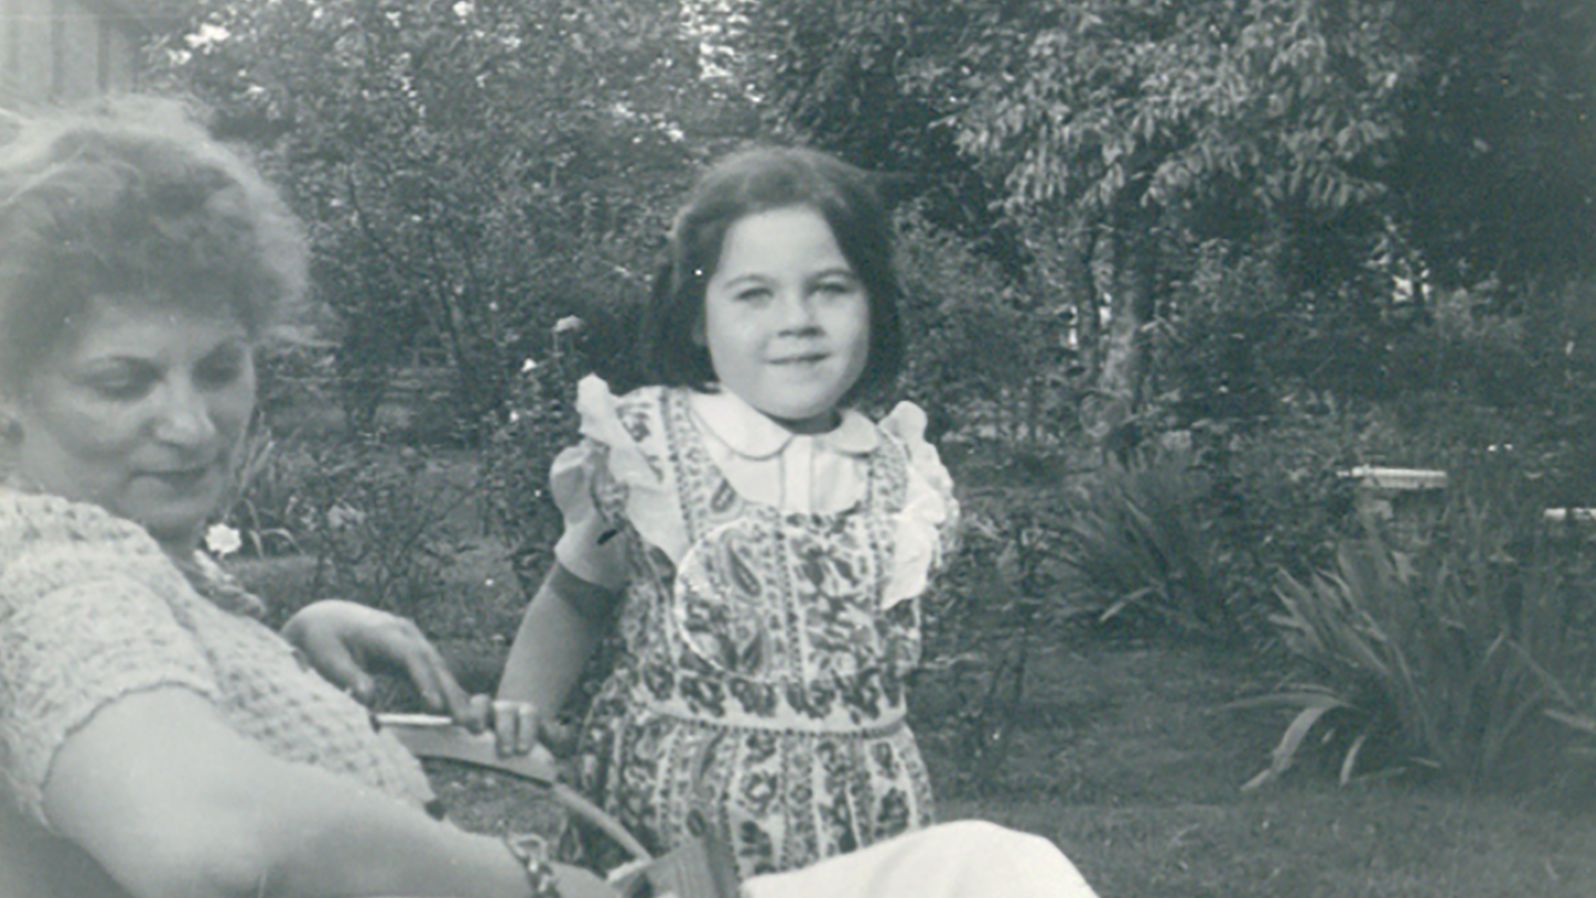 Joan Salter pictured as a child with her foster mother in the United States.